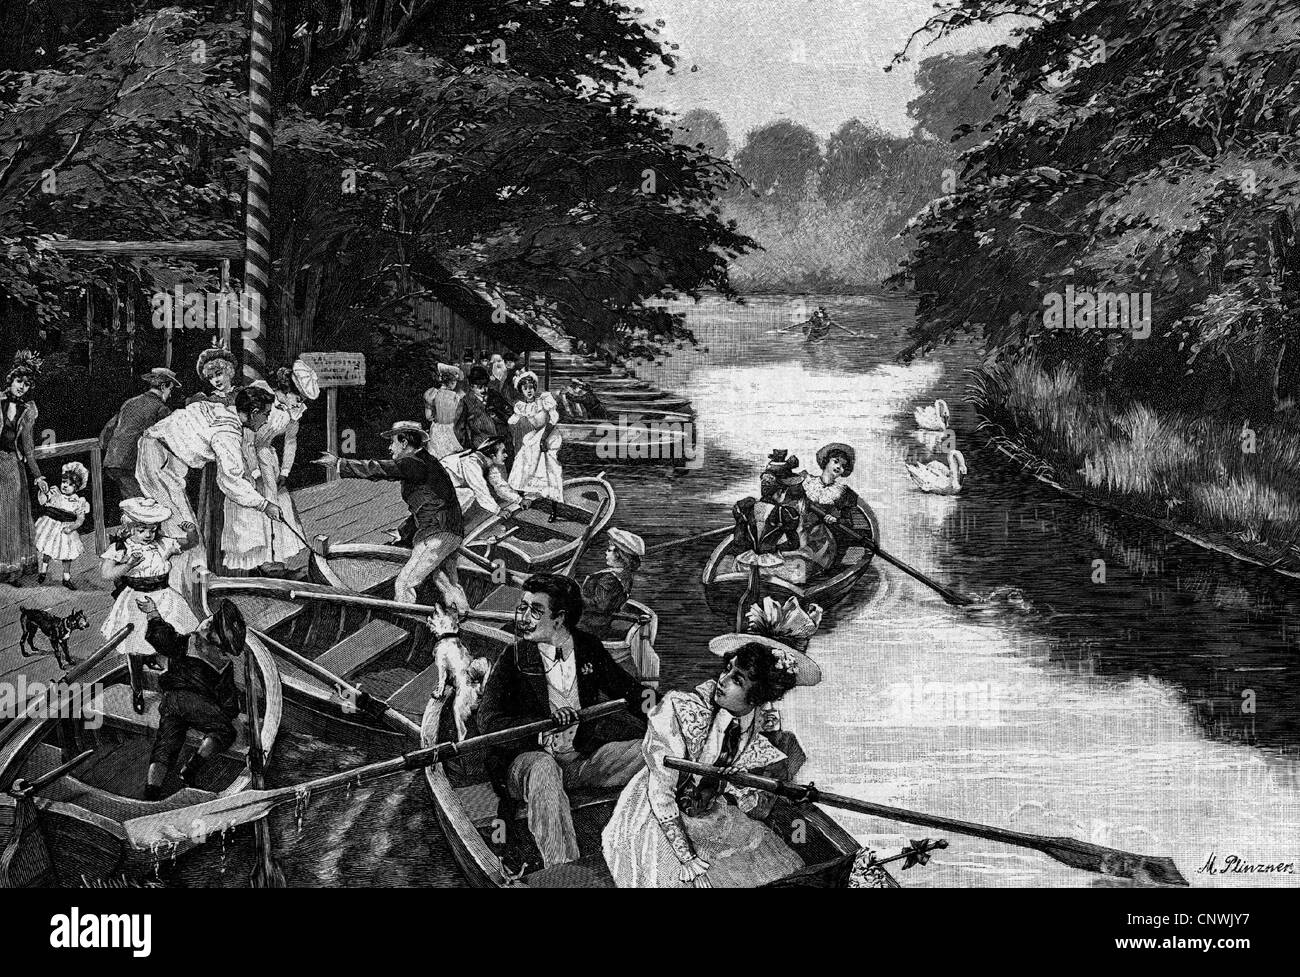 leisure time, trip, 'Am Neuen See im Berliner Tiergarten' (At the new lake in the Tiergarten park of Berlin), drawing by M. Plinzer, circa 1900, Additional-Rights-Clearences-Not Available Stock Photo